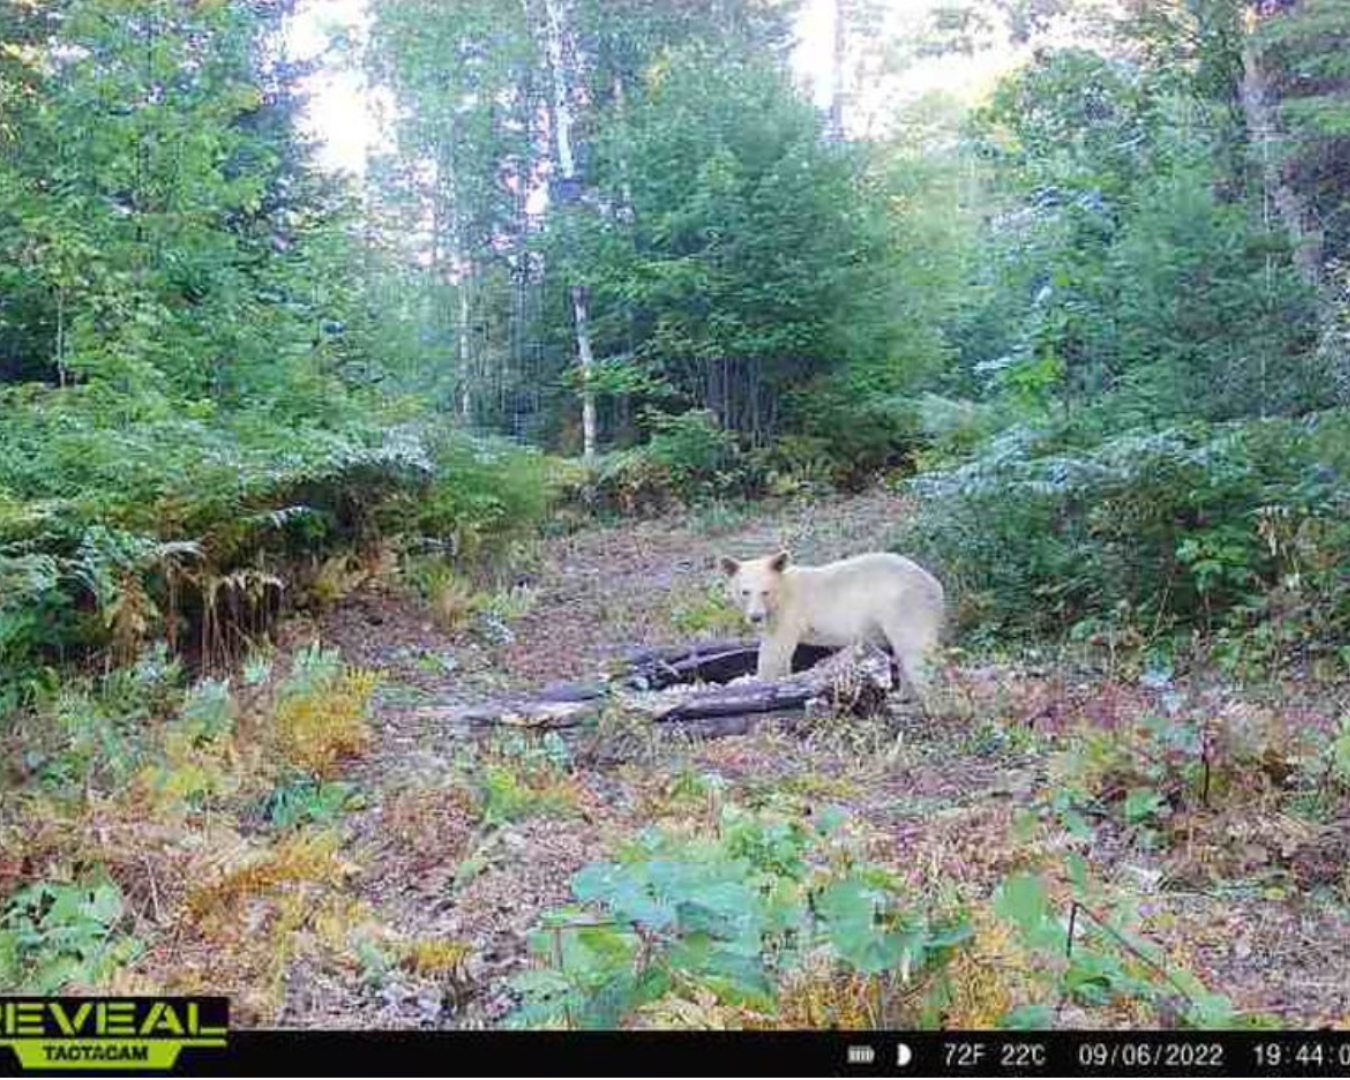 A still from a trail cam showing a bear with all white fur walking through a forest.